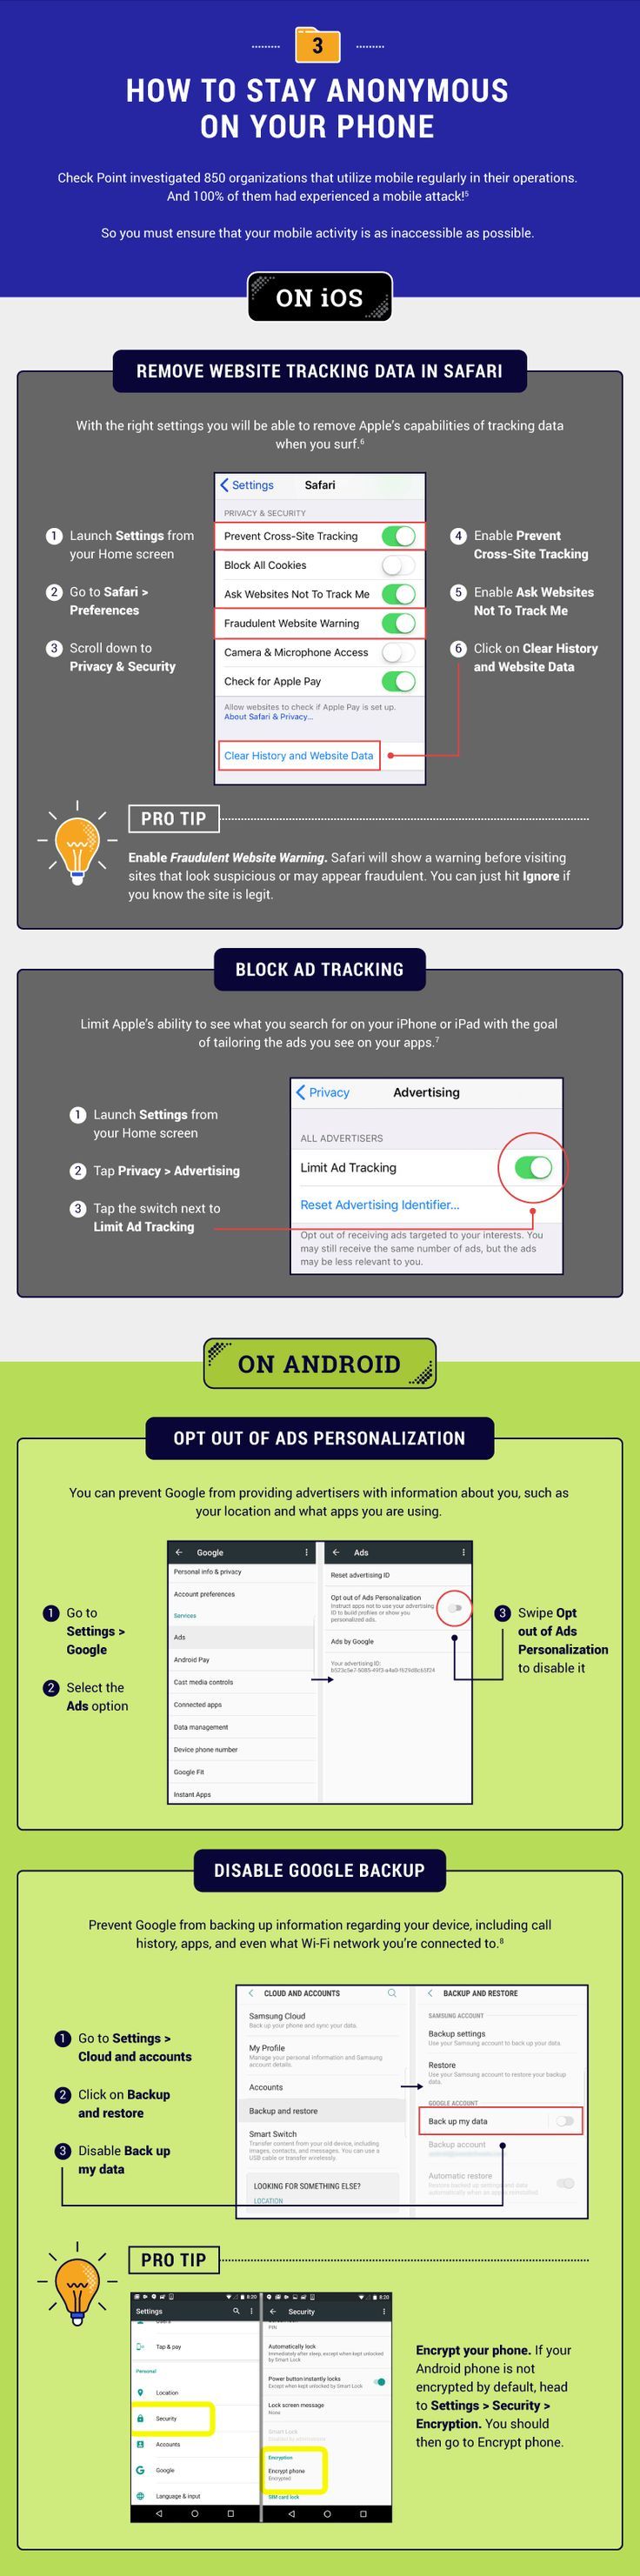 1540648213_294_Marketing-Infographic-Protect-your-privacy-on-mobile-Click-for-more-infographics-with-privacy-tips.-H Marketing Infographic : Protect your privacy on mobile! Click for more infographics with privacy tips. H...